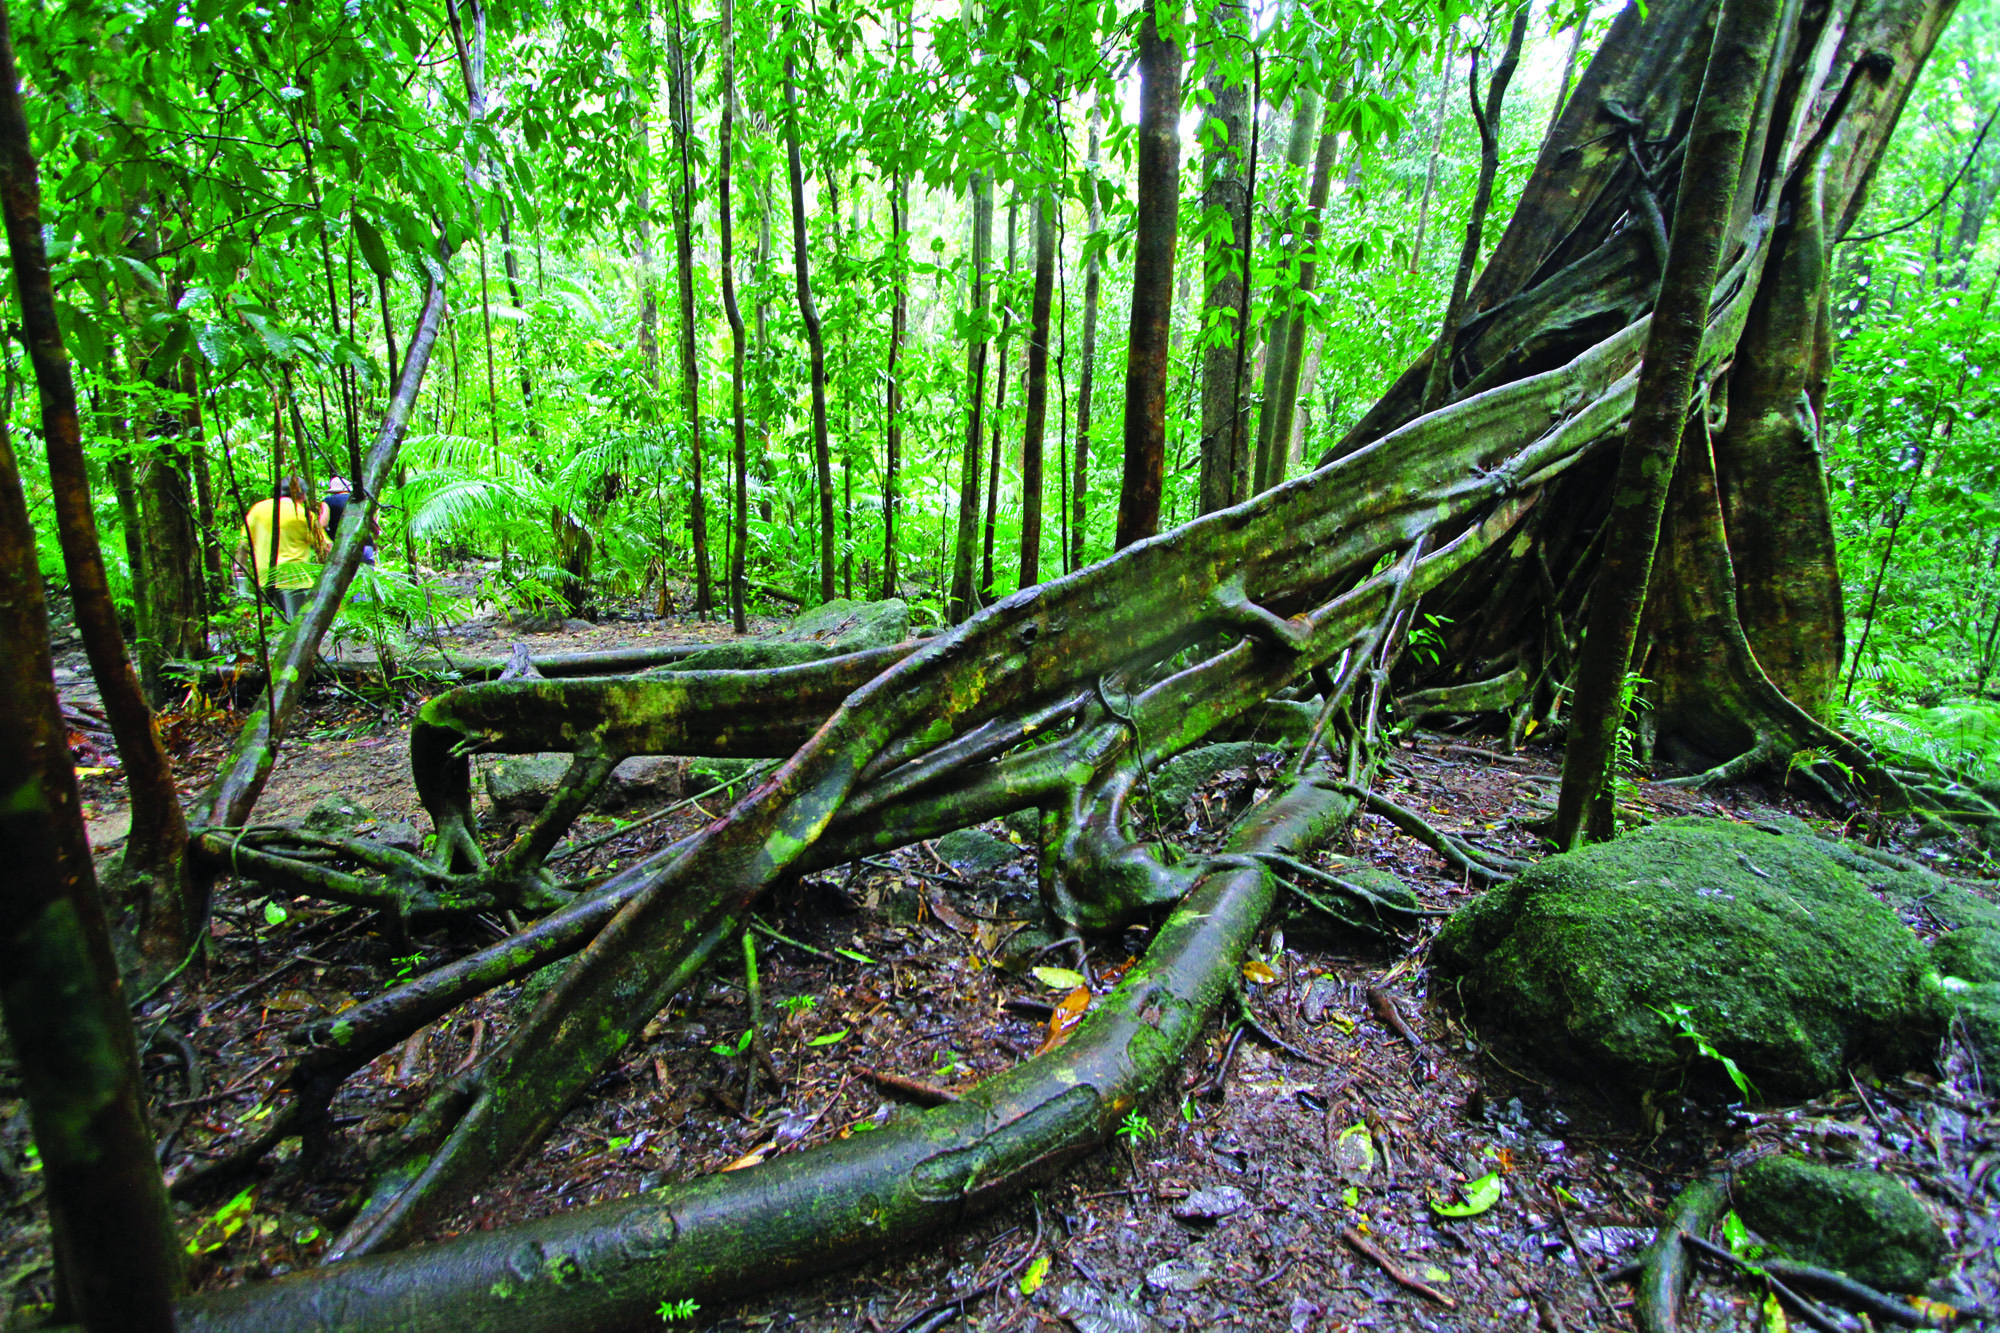 Deep-rooted rainforest systems